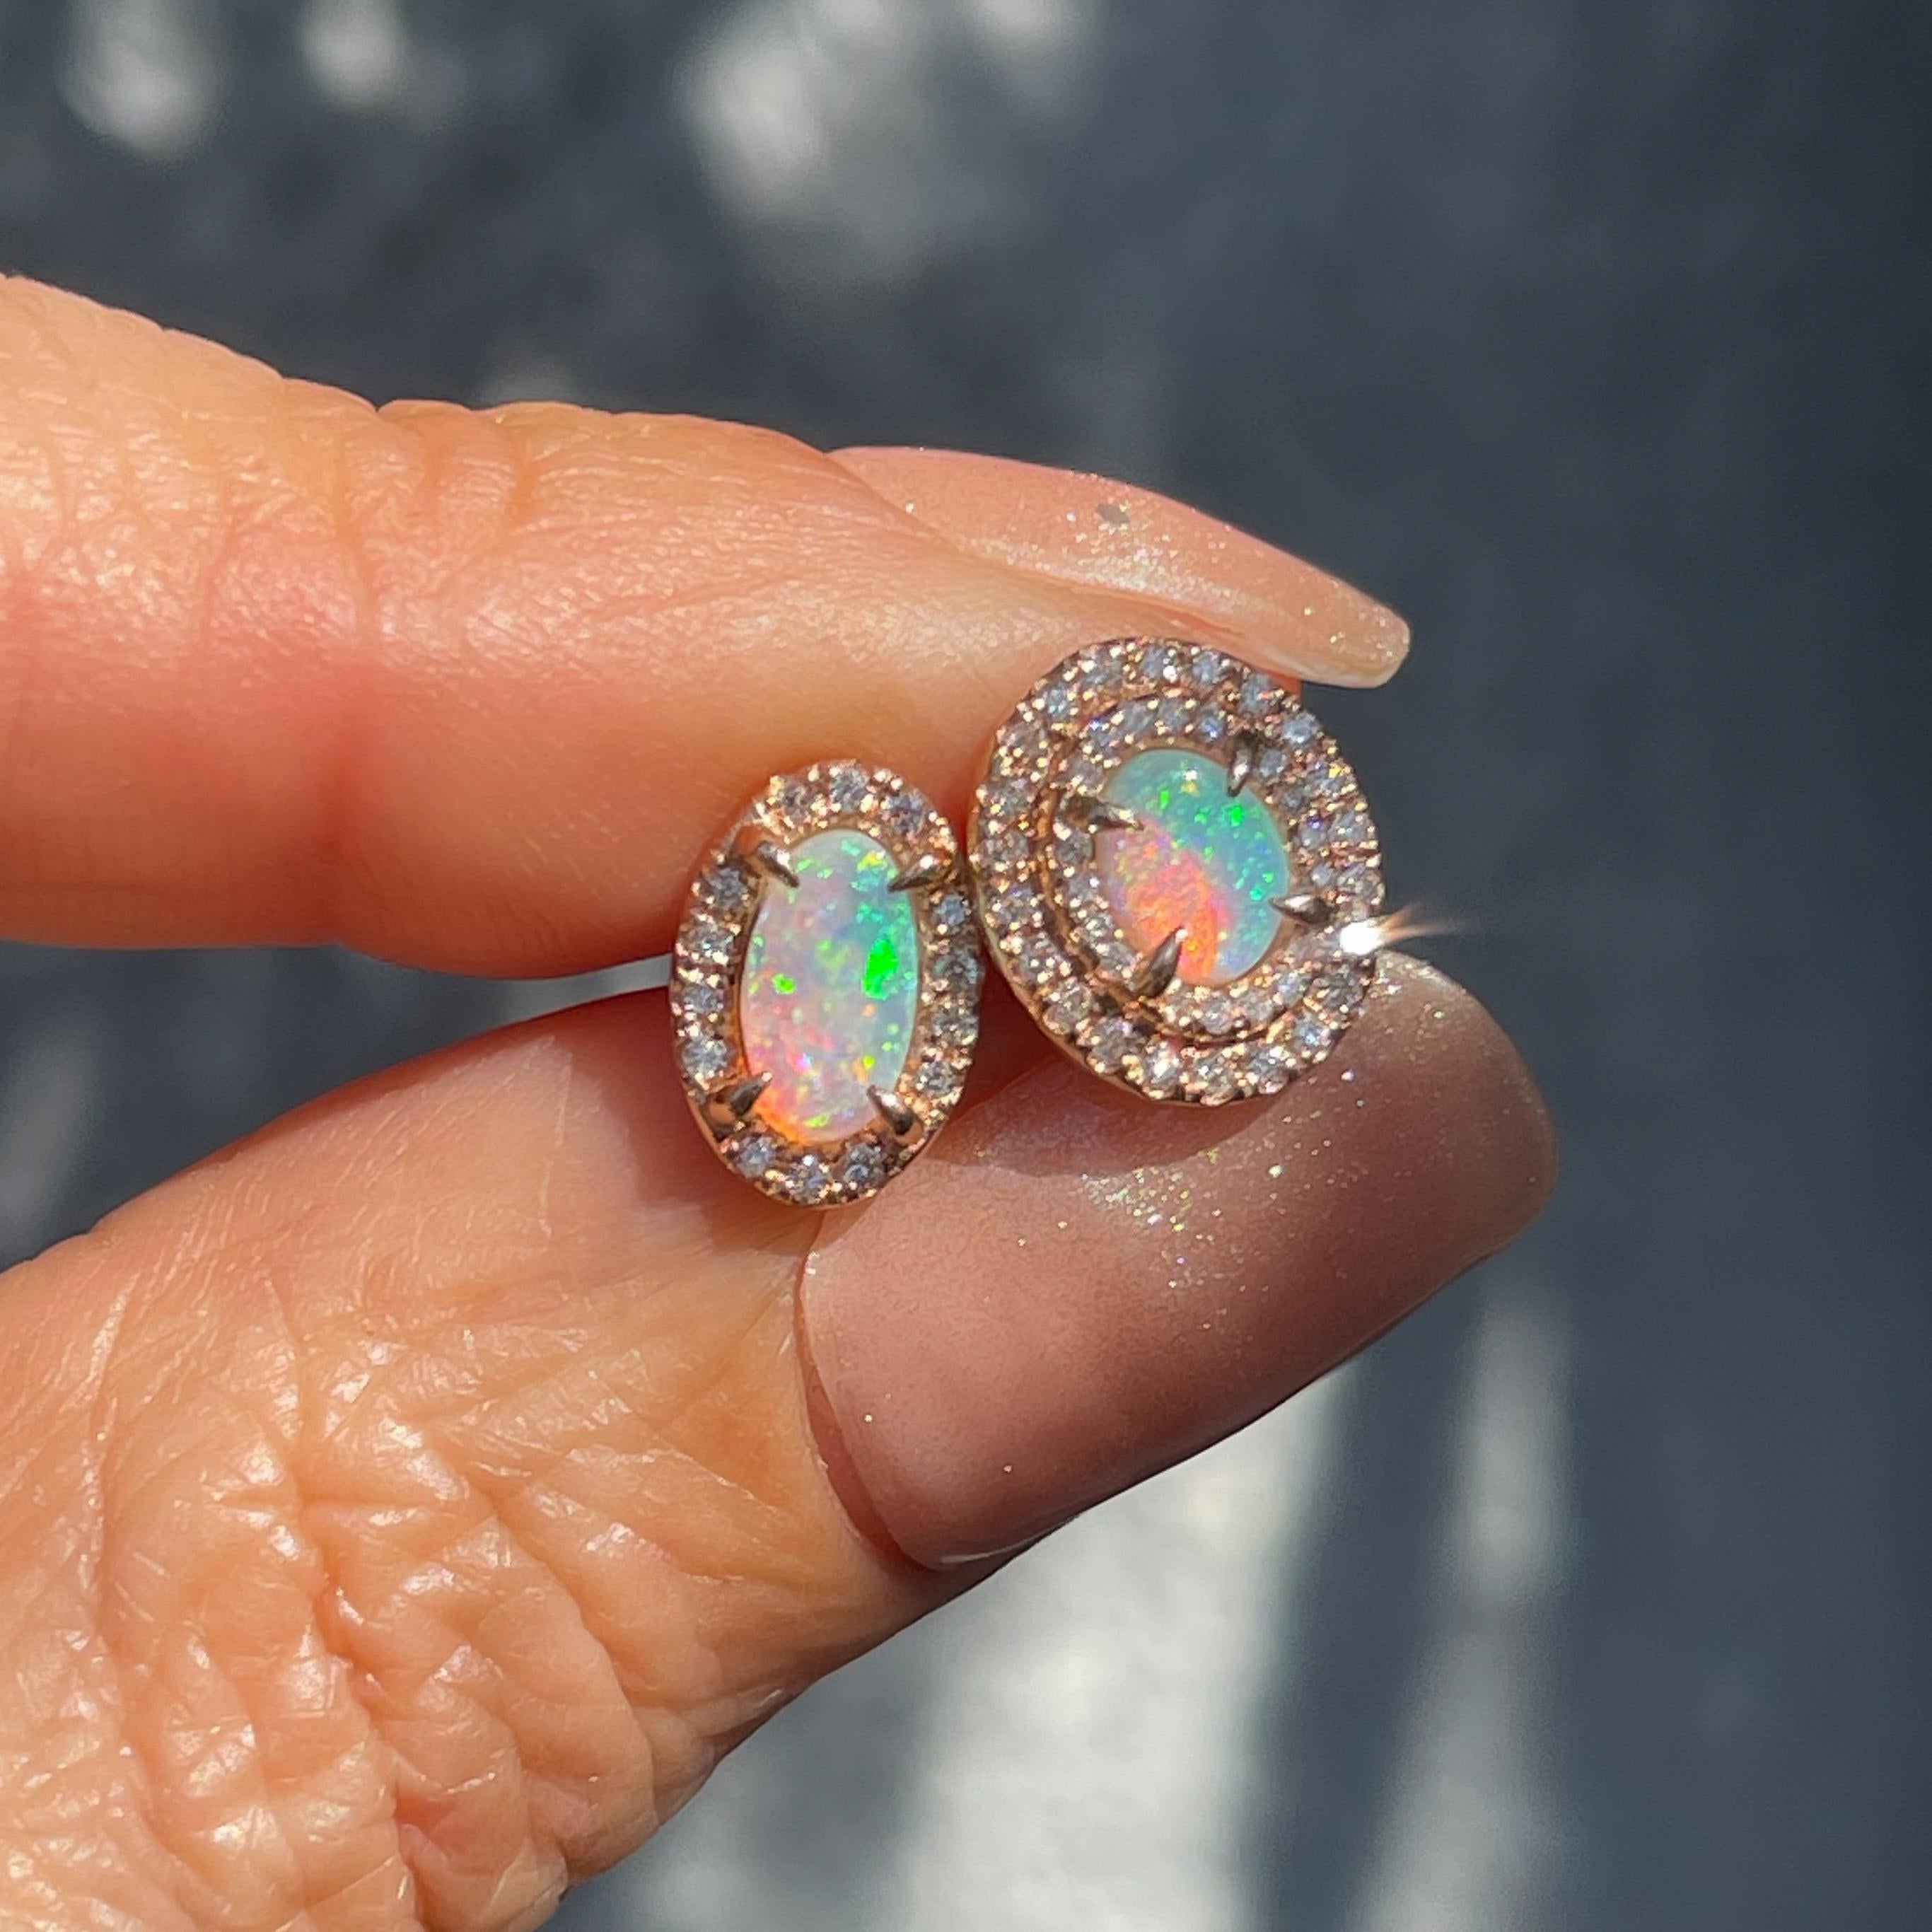 Two entrancing Crystal Opals unite in these Australian Opal Earrings. Set in rose gold and adorned with diamonds, the opal stud earrings exude an air of fantasy. Both oval in shape, yet asymmetrical in dimension, the opals express the same mystical